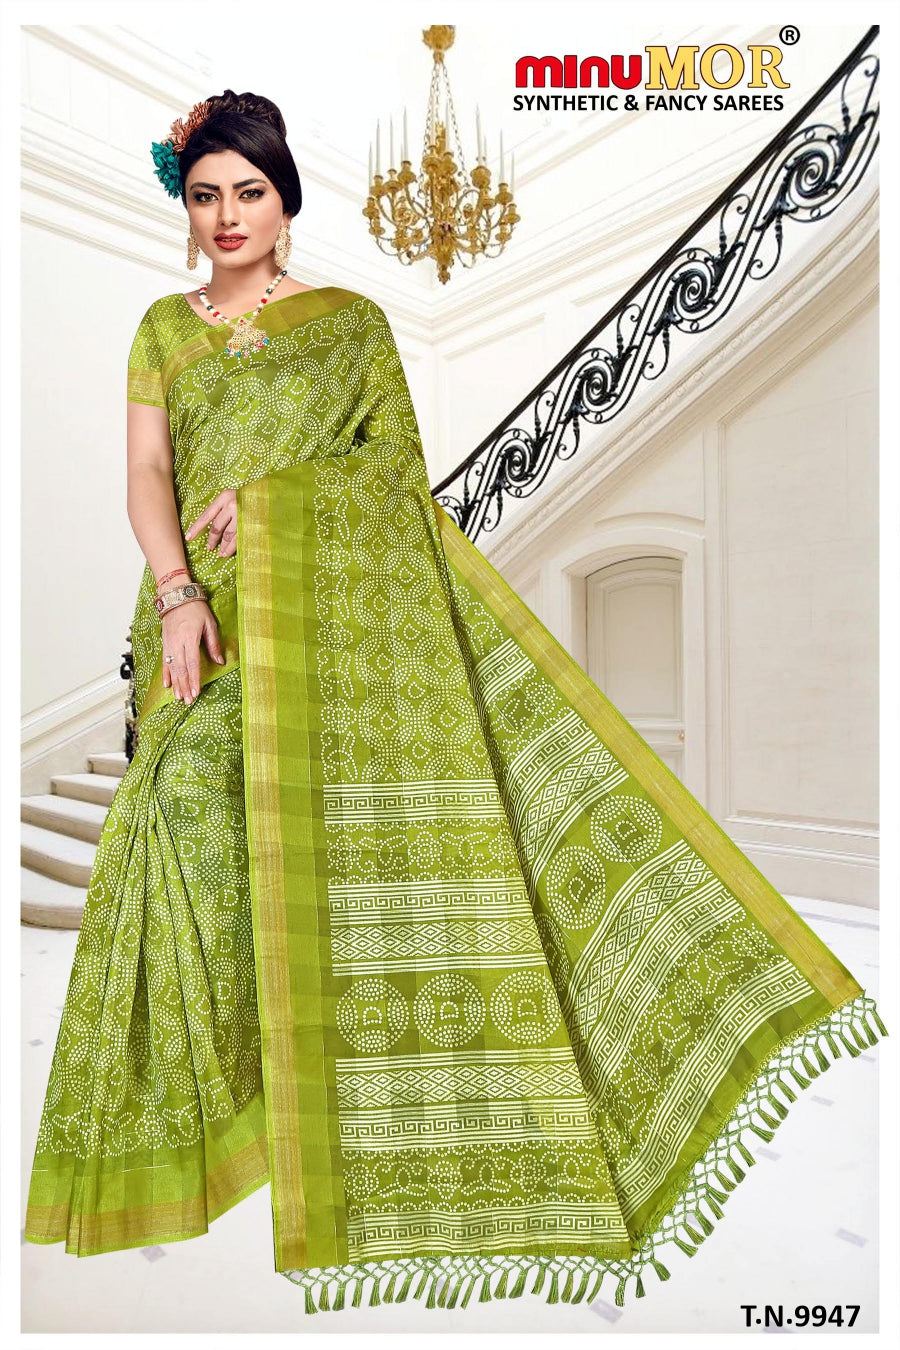 online image of Wholesale sarees for Diwali for sale 